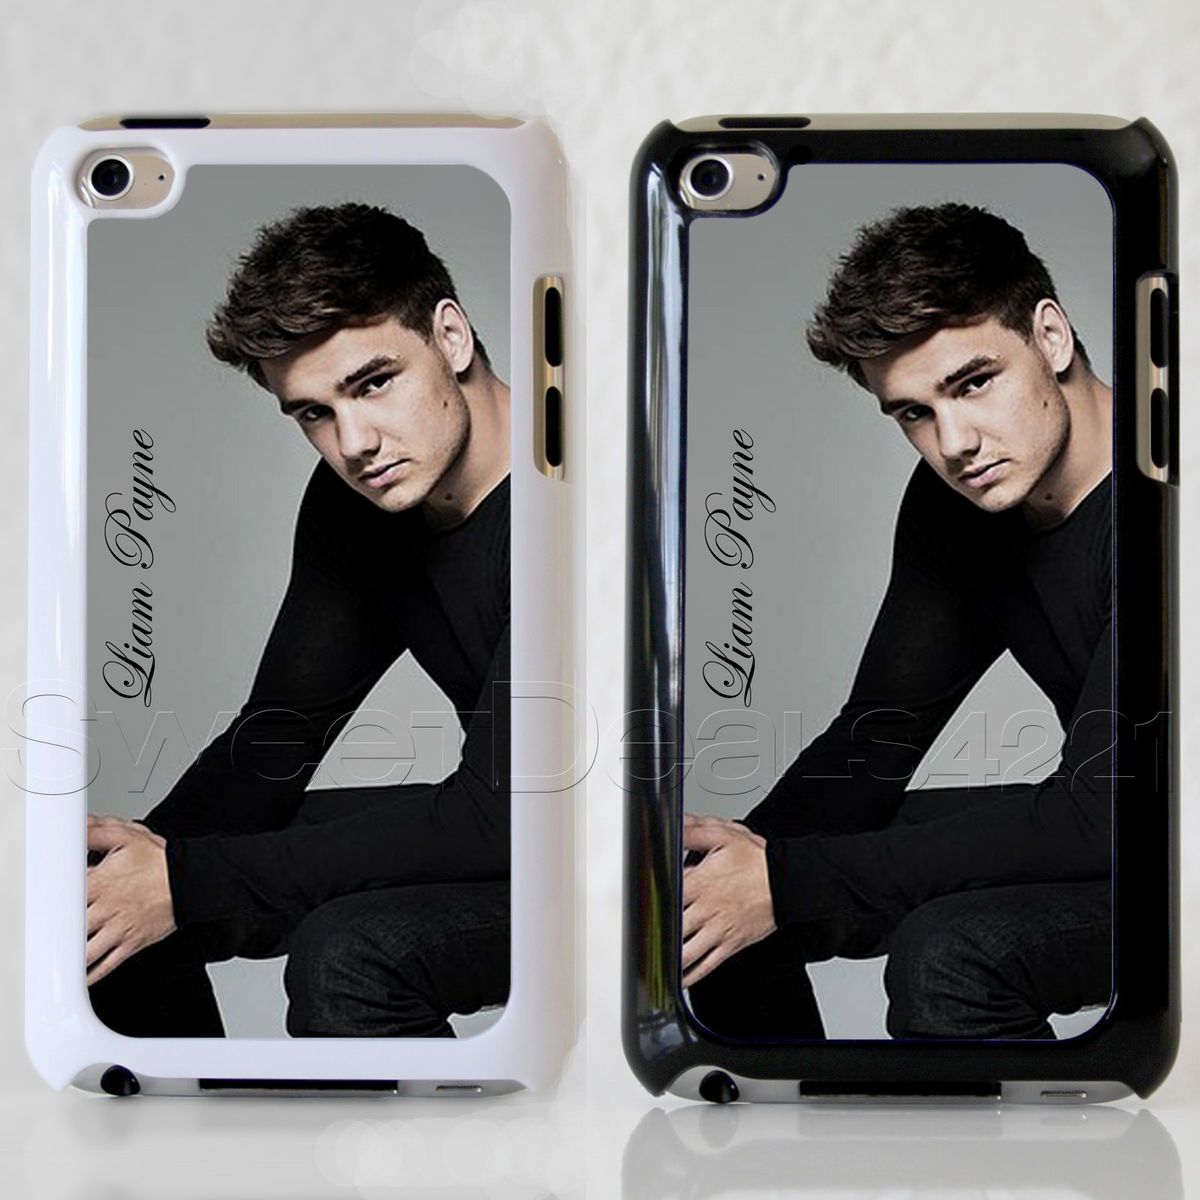 Apple iPod Touch 4th Gen Liam Payne Case Cover Protector One Direction